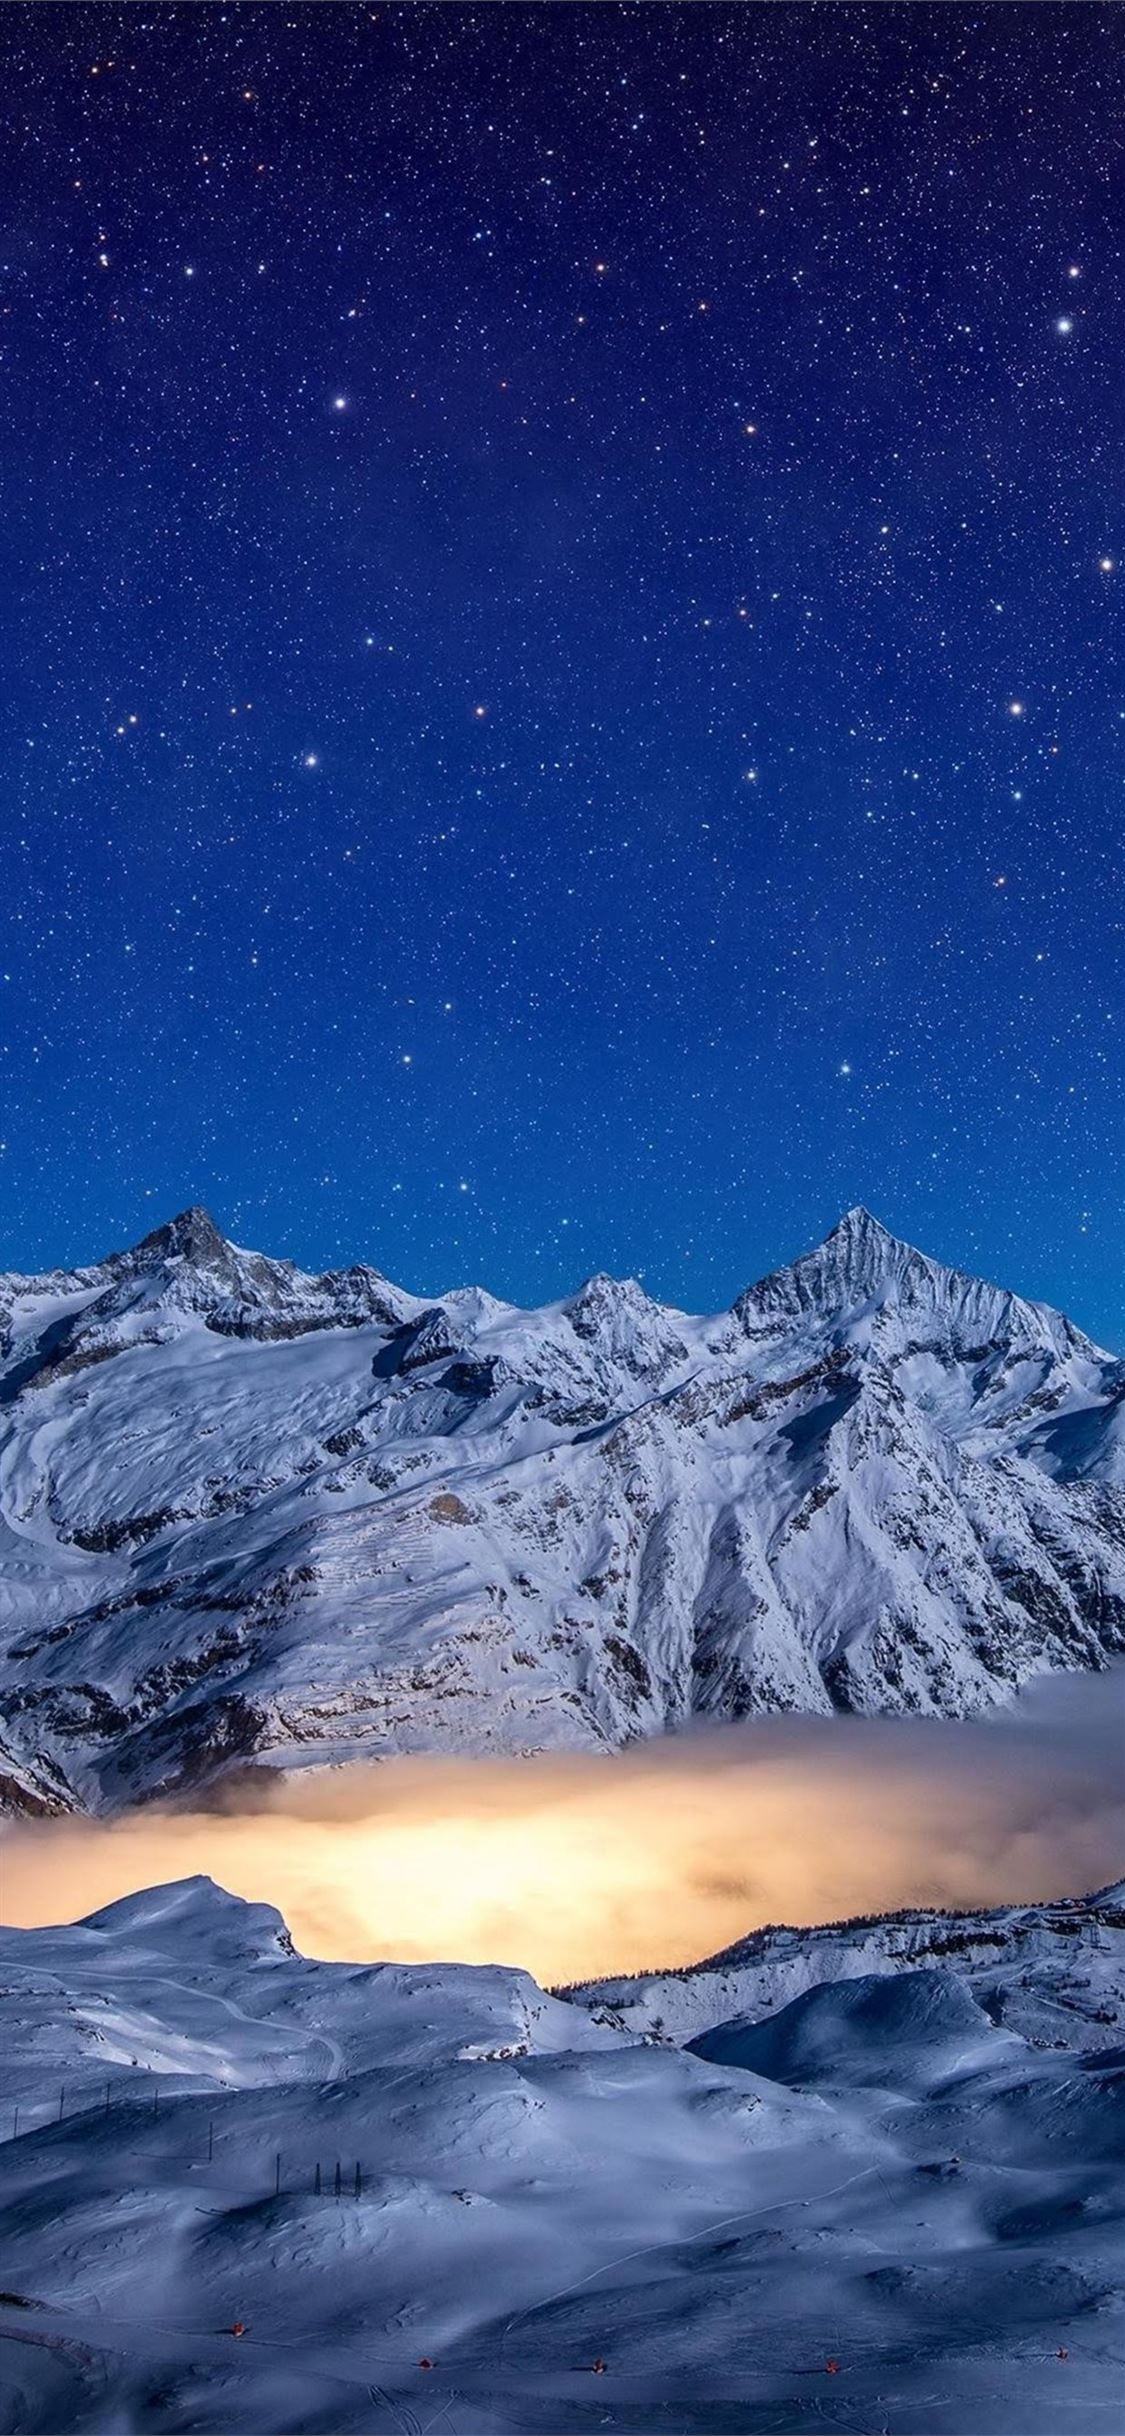 starry night snow covered mountains 4k #snow #mountains #nature k #iPhone11Wallpaper. Mountain wallpaper, Aesthetic wallpaper, Nebula wallpaper